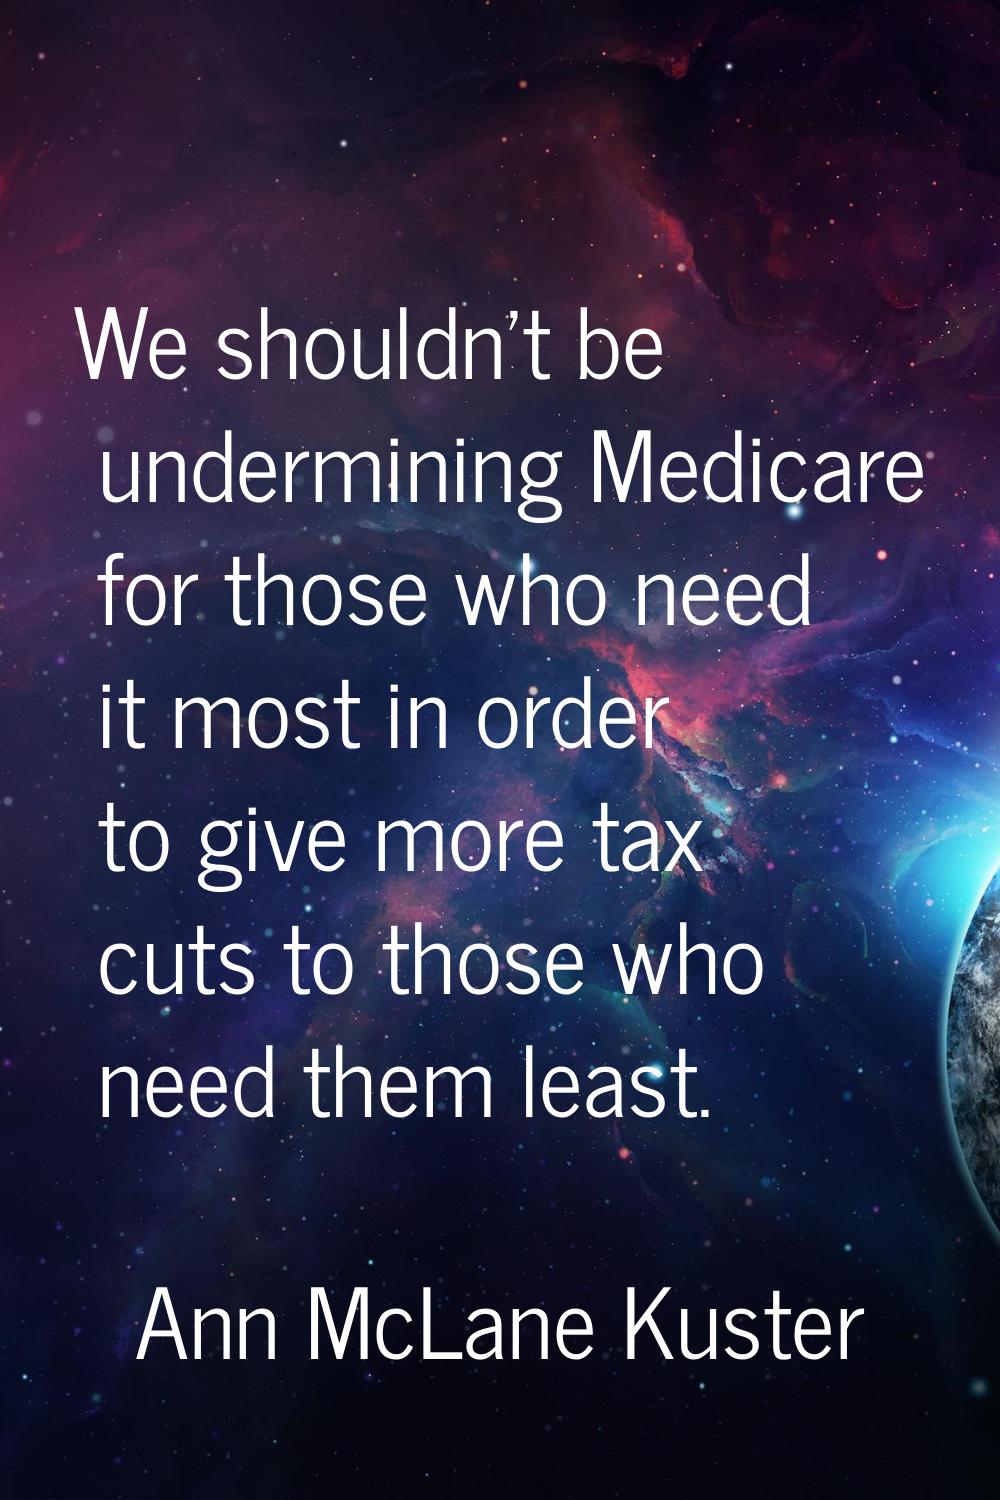 We shouldn't be undermining Medicare for those who need it most in order to give more tax cuts to t